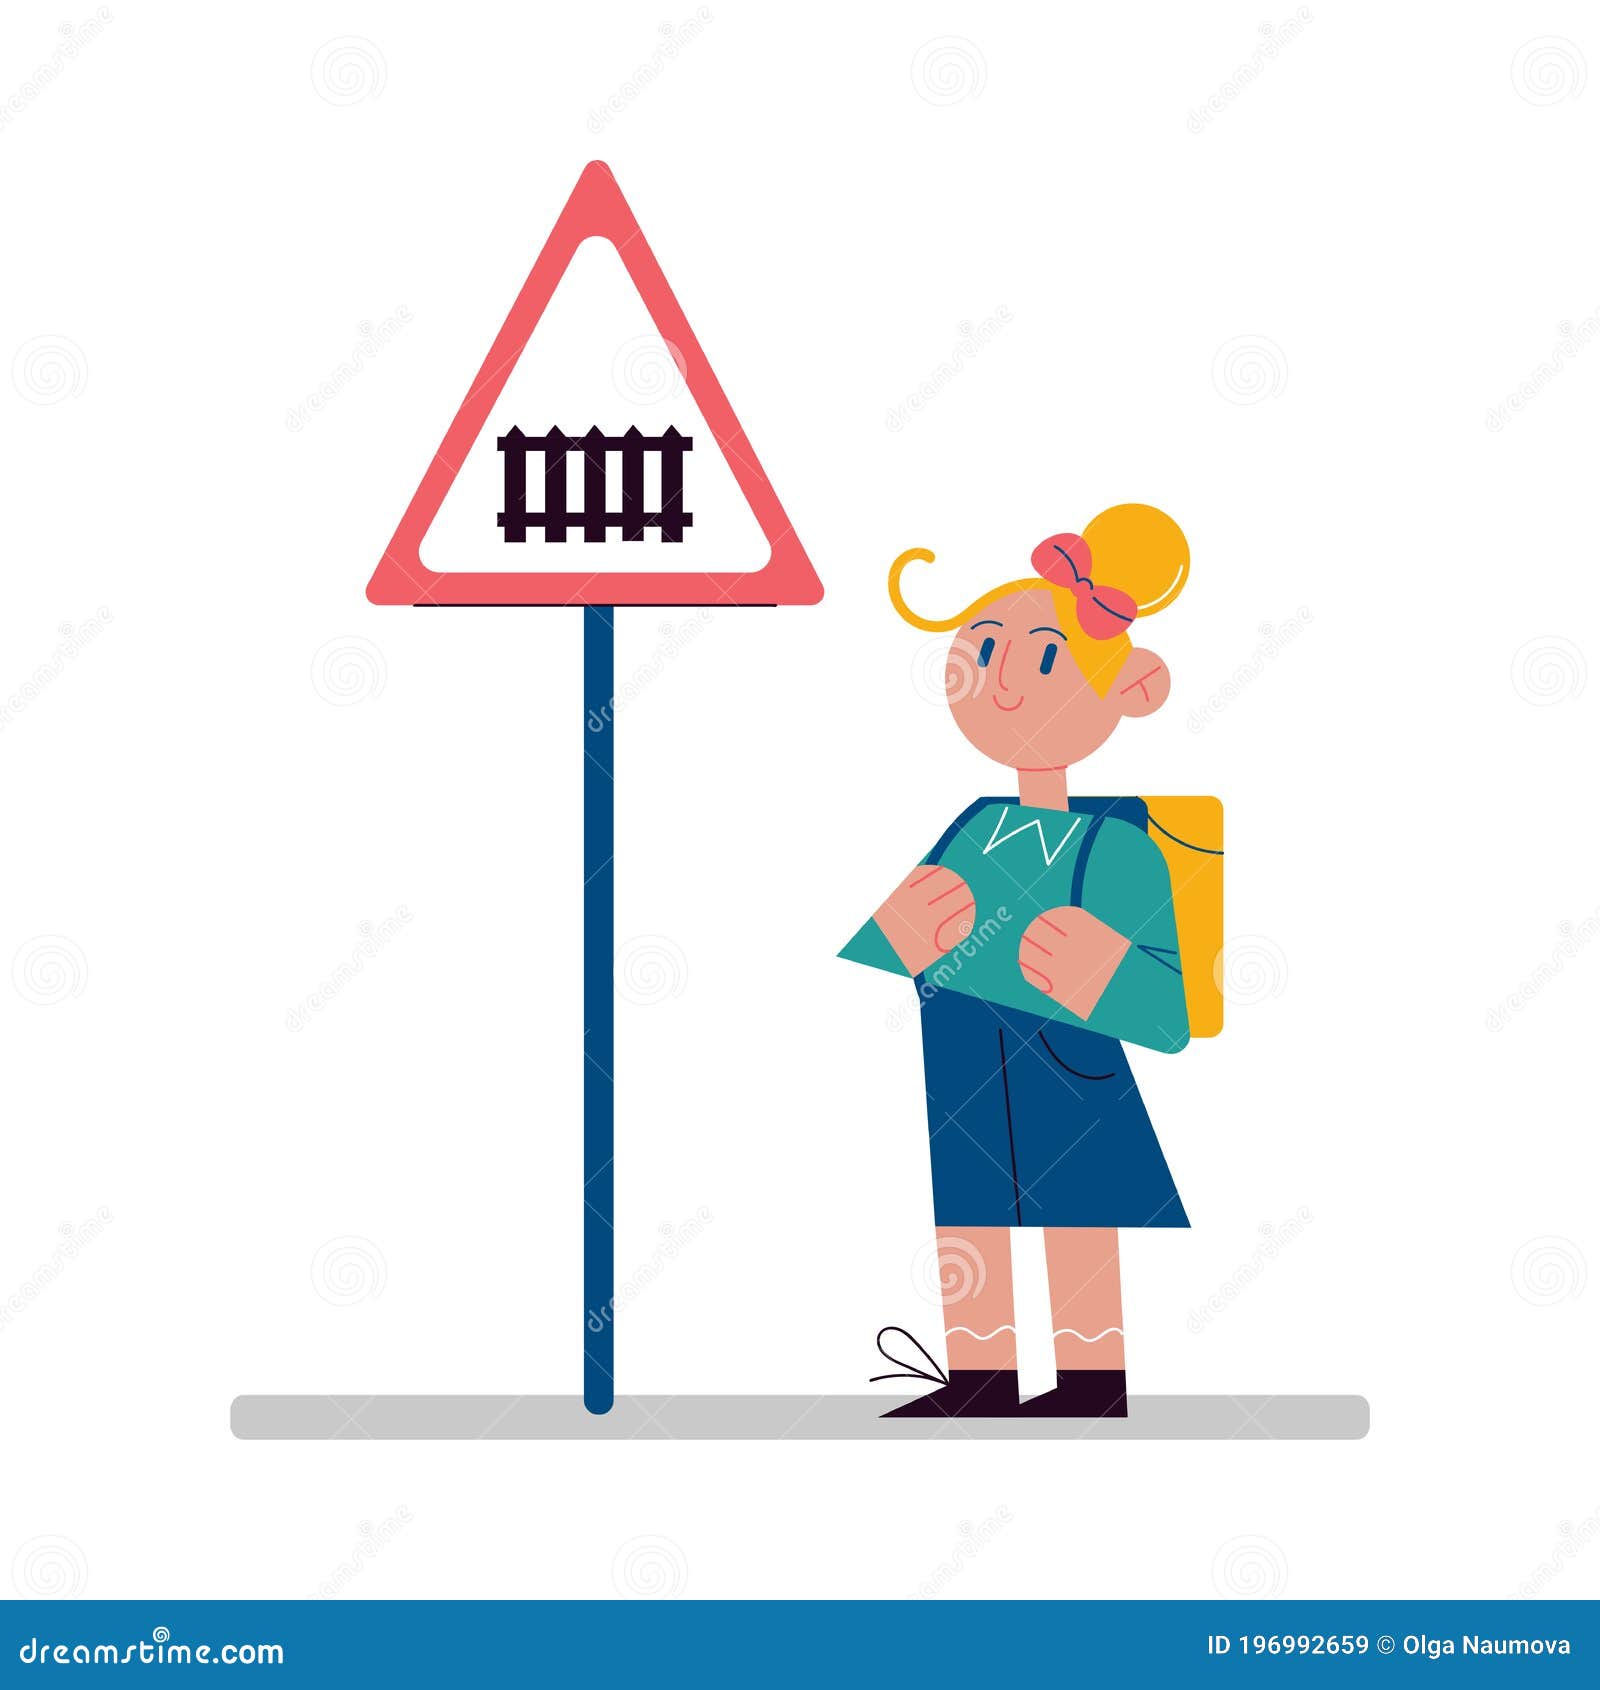 Girl Looking At Level Crossing Warning Sign With Barrier And Memorizing Traffic Rule Sign Stock Vector Illustration Of Pupil Danger